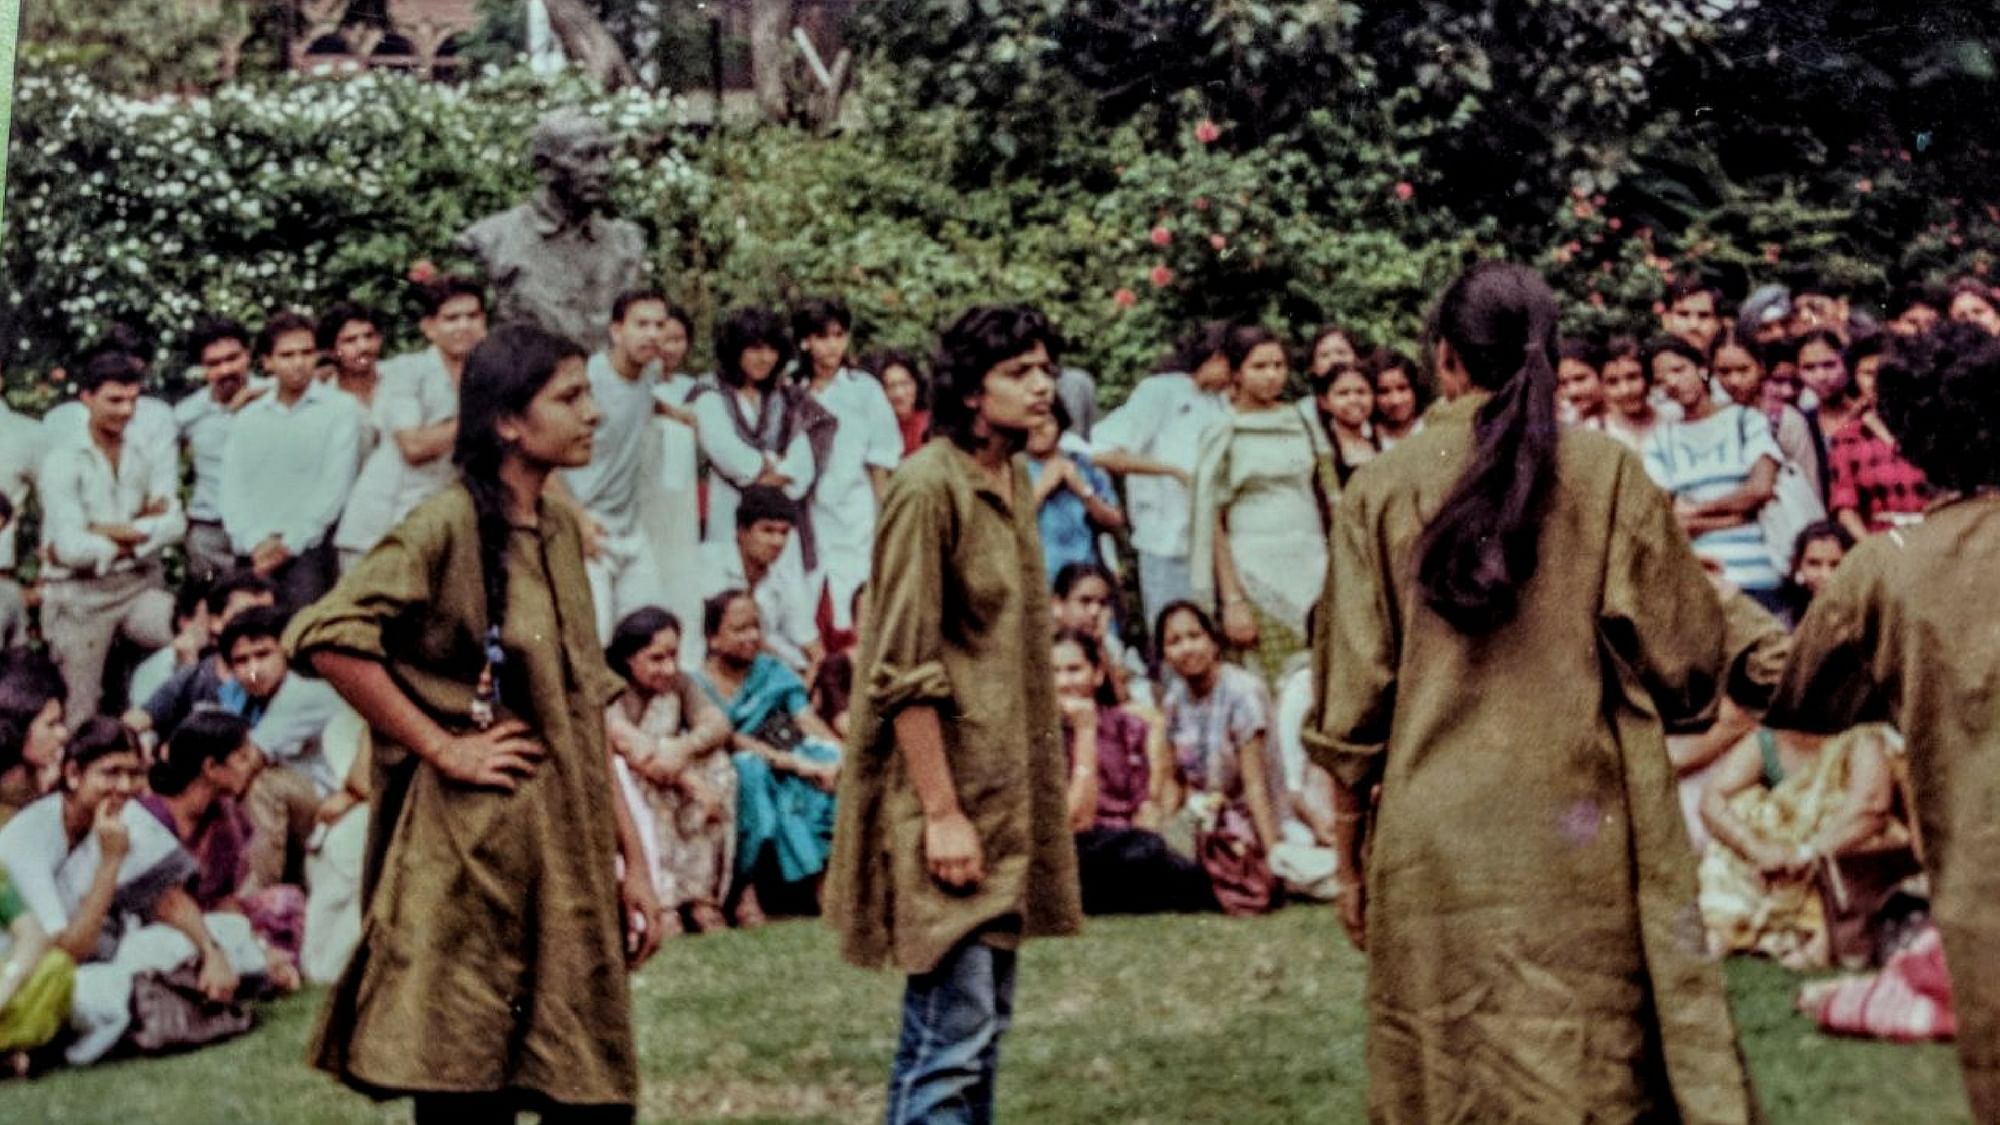 The author with her street theatre troupe in college.